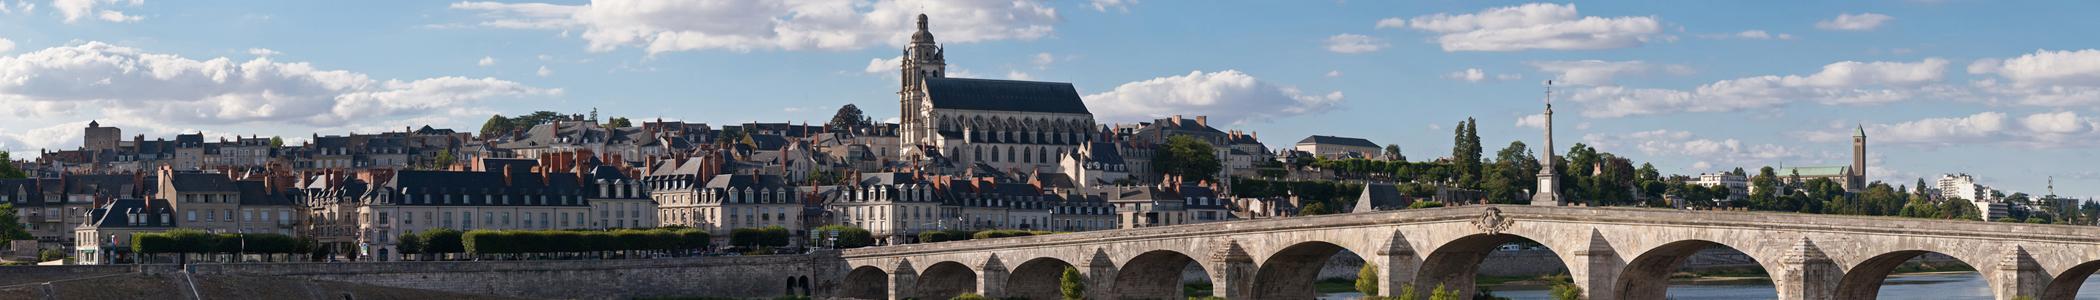 Banner image for Blois on GigsGuide